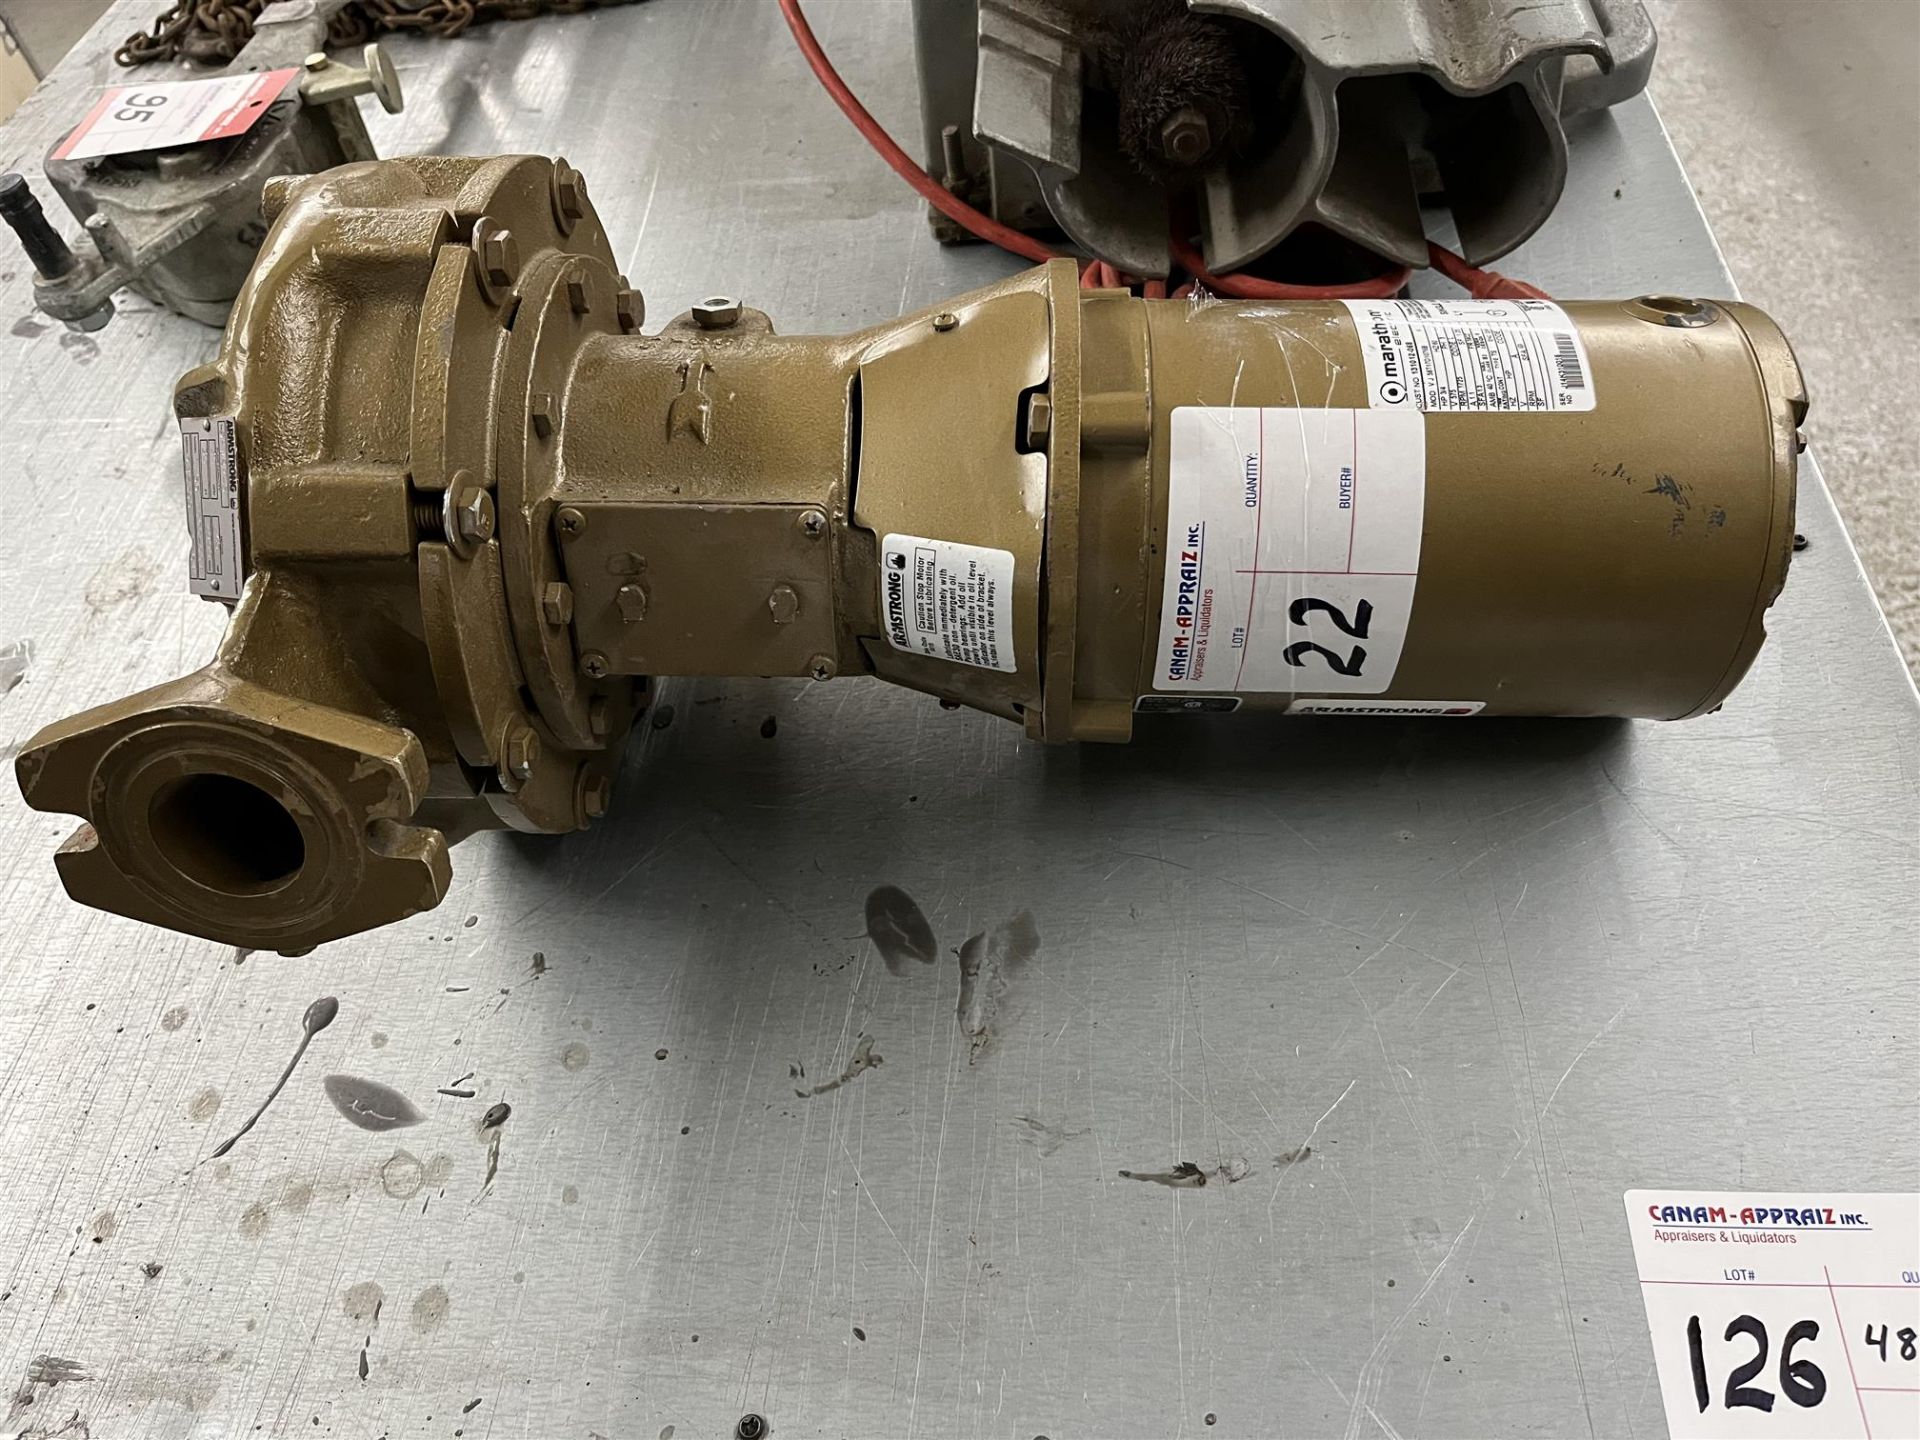 ARMSTRONG 1.5D 1060-001 CENTRIFUGAL PUMP, S/N: 735099, 30GPM, 30FT, .75 HP, 1800 RPM